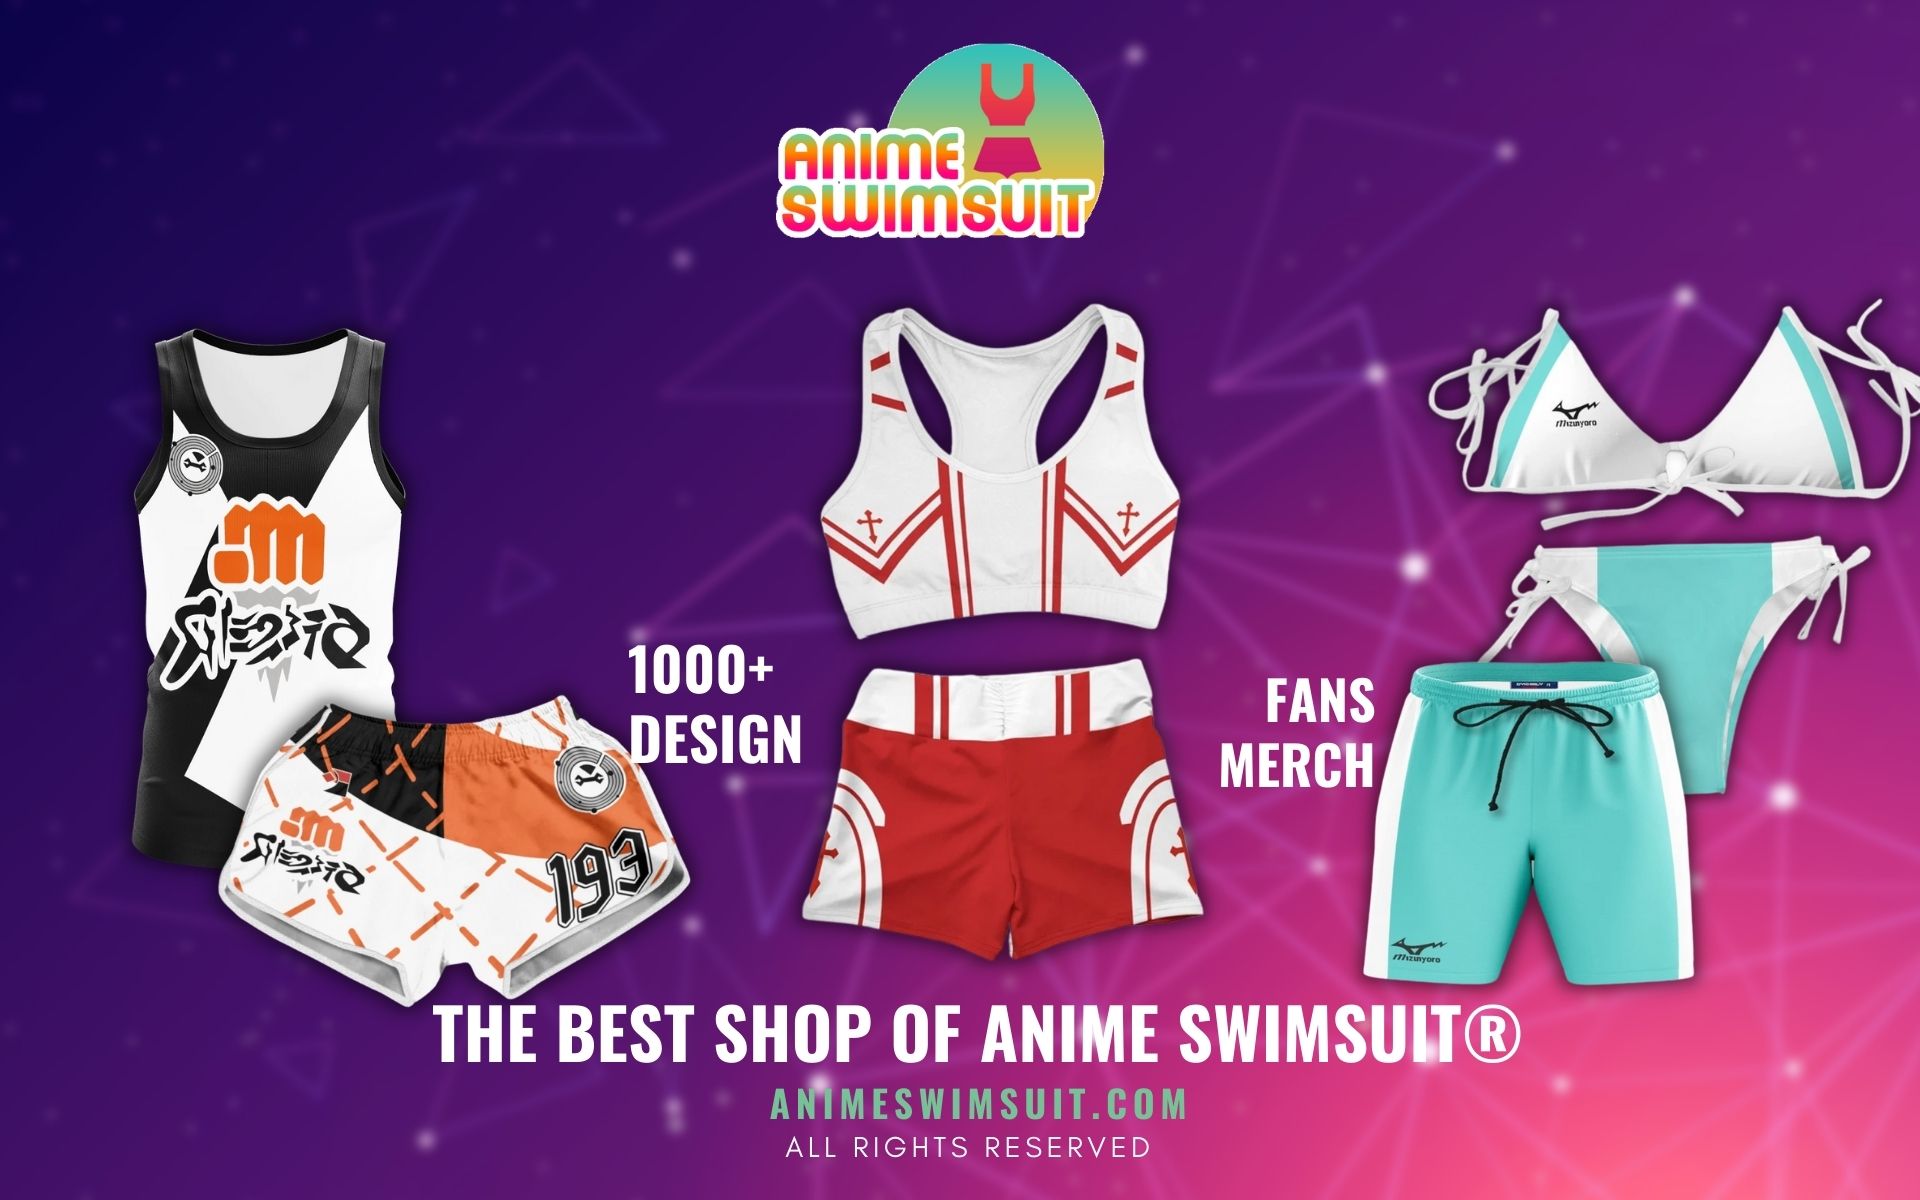 Anime Swimsuit Merch Web Banner - Anime Swimsuits